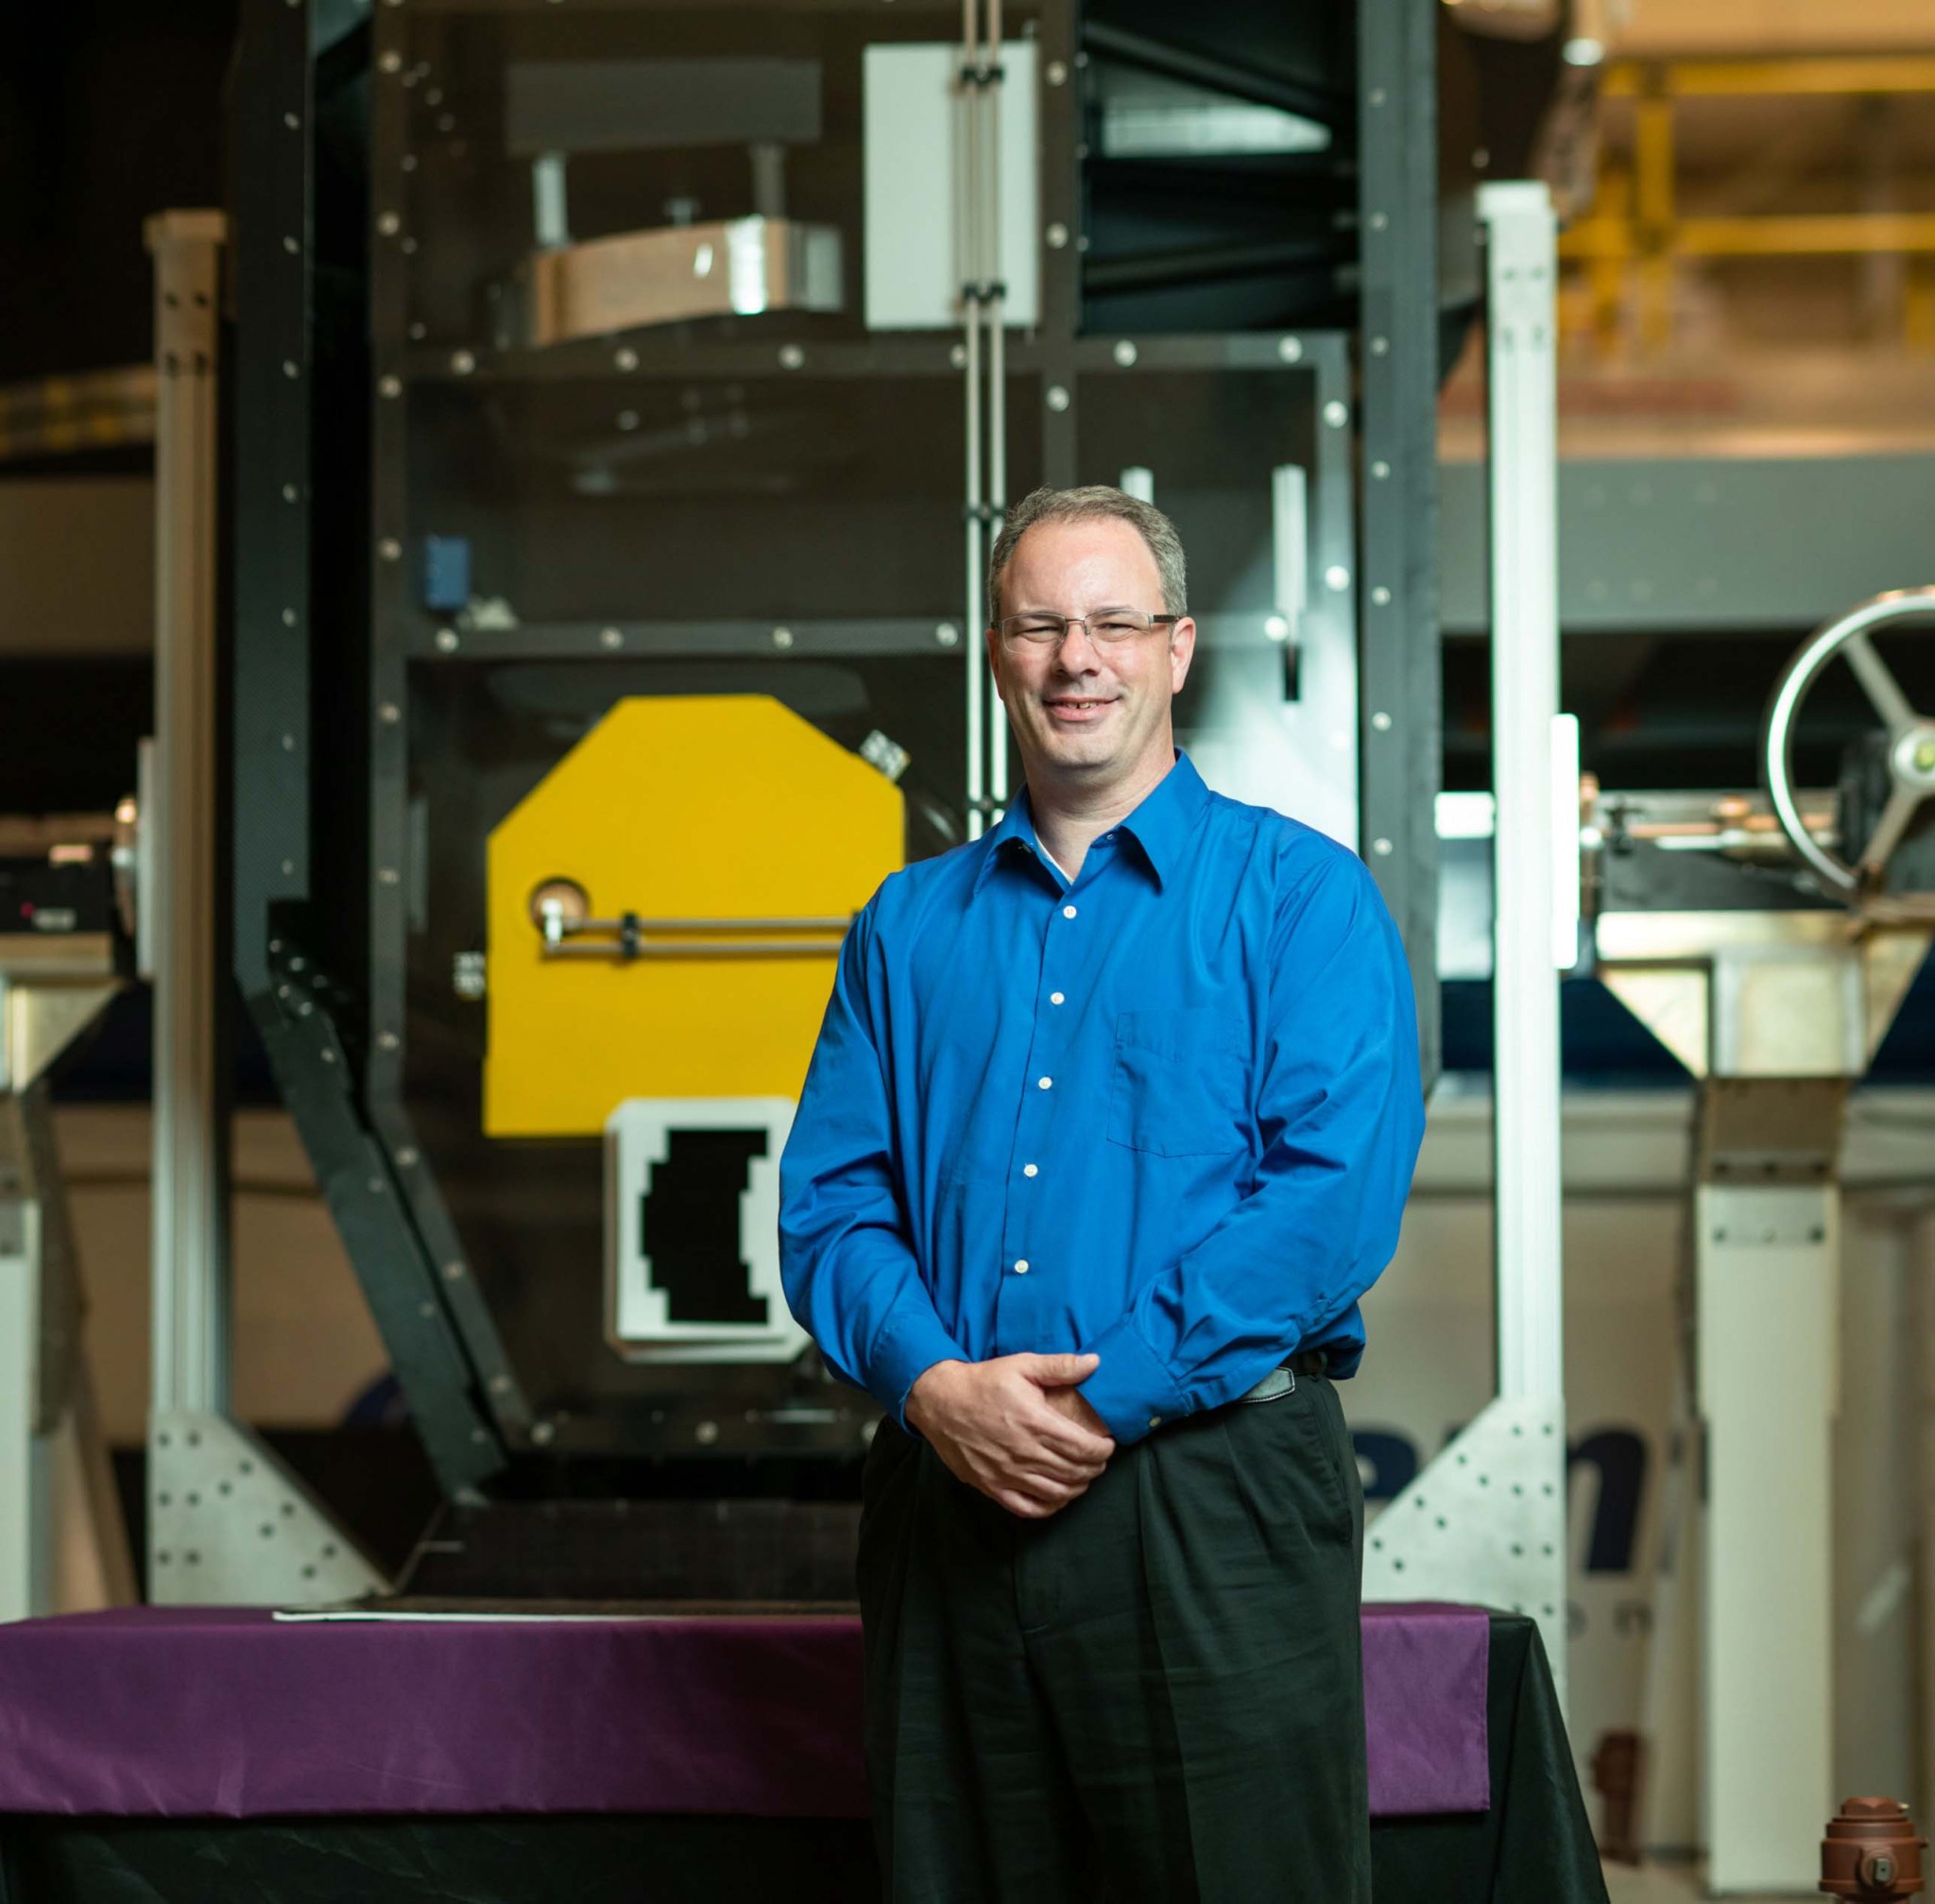 Man with shirt grey-brown hair and glasses, wearing a blue dress shirt and black pants stands, smiling, in front of machinery with one of the Webb, gold hexagonal mirrors inside.  